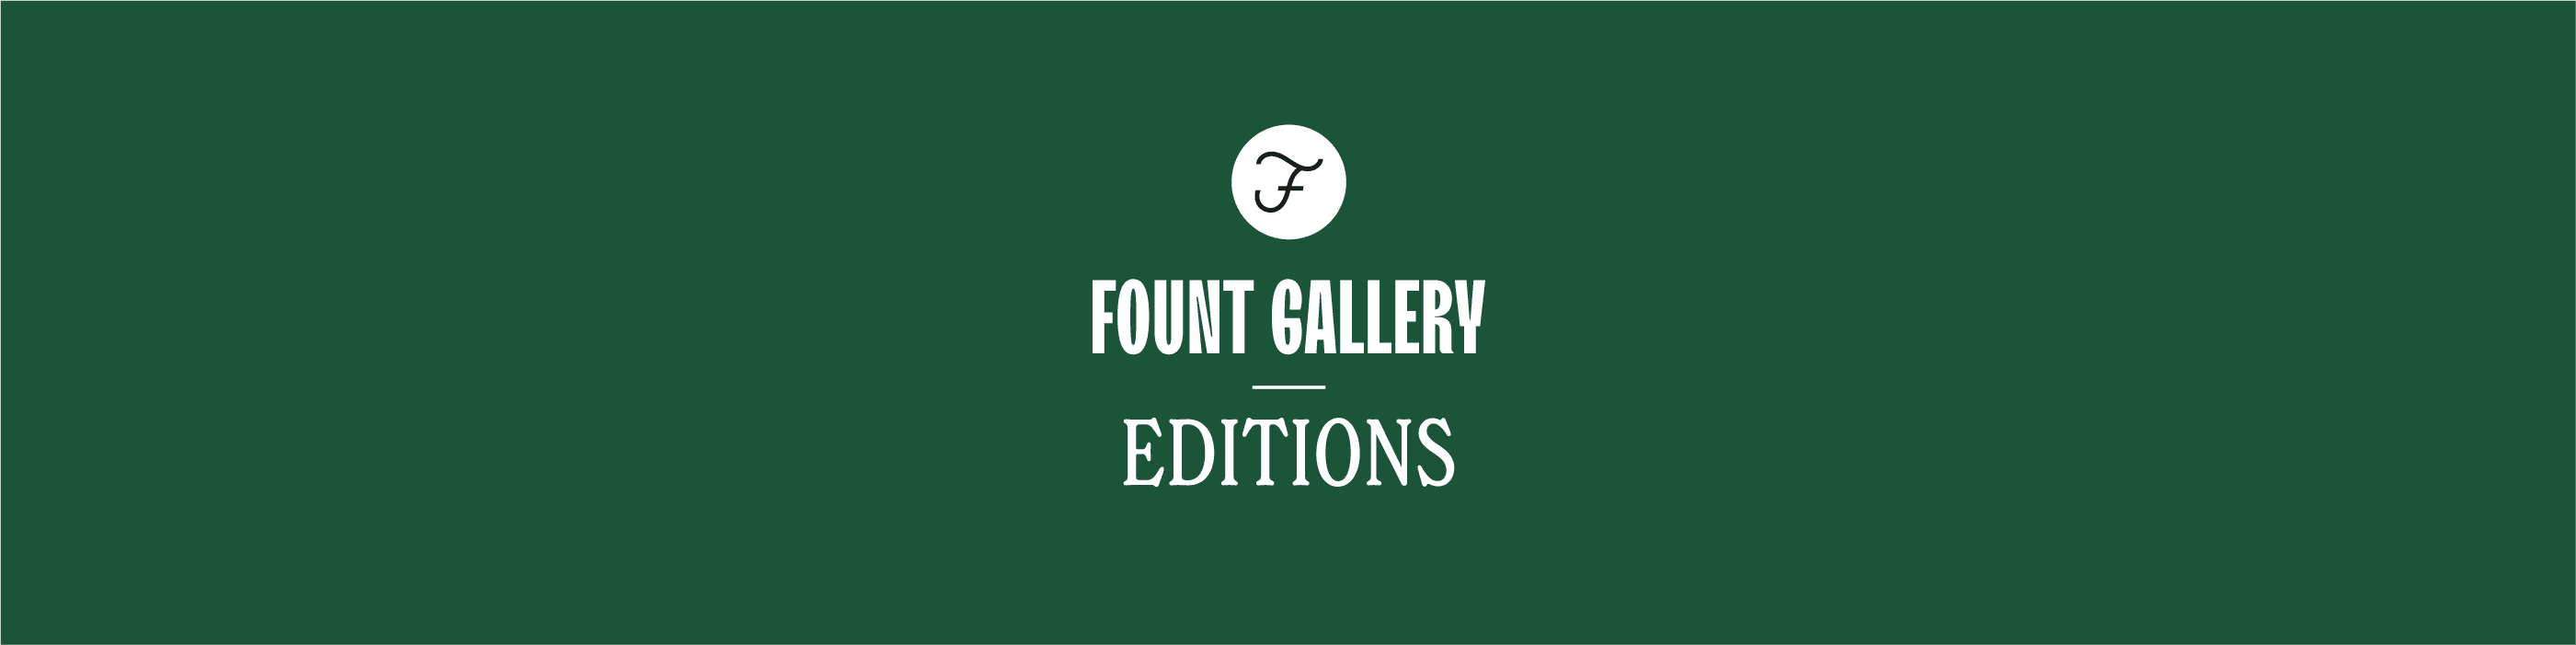 Fount Gallery